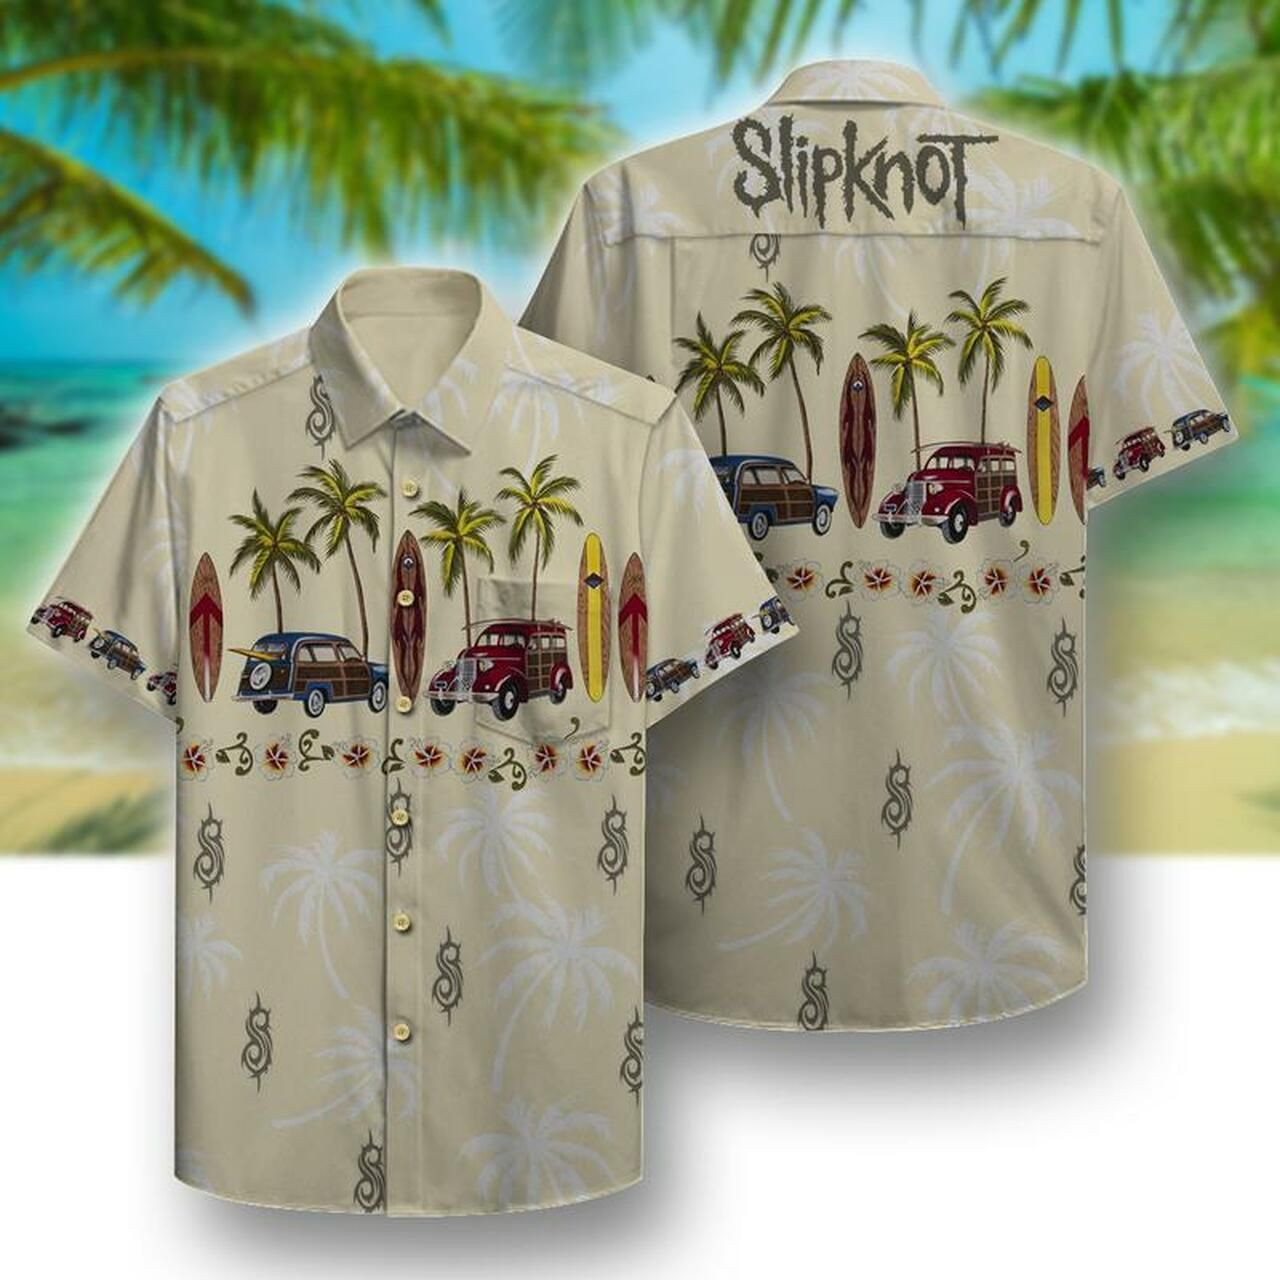 Discover many styles of Hawaiian shirts on the market in 2022 140